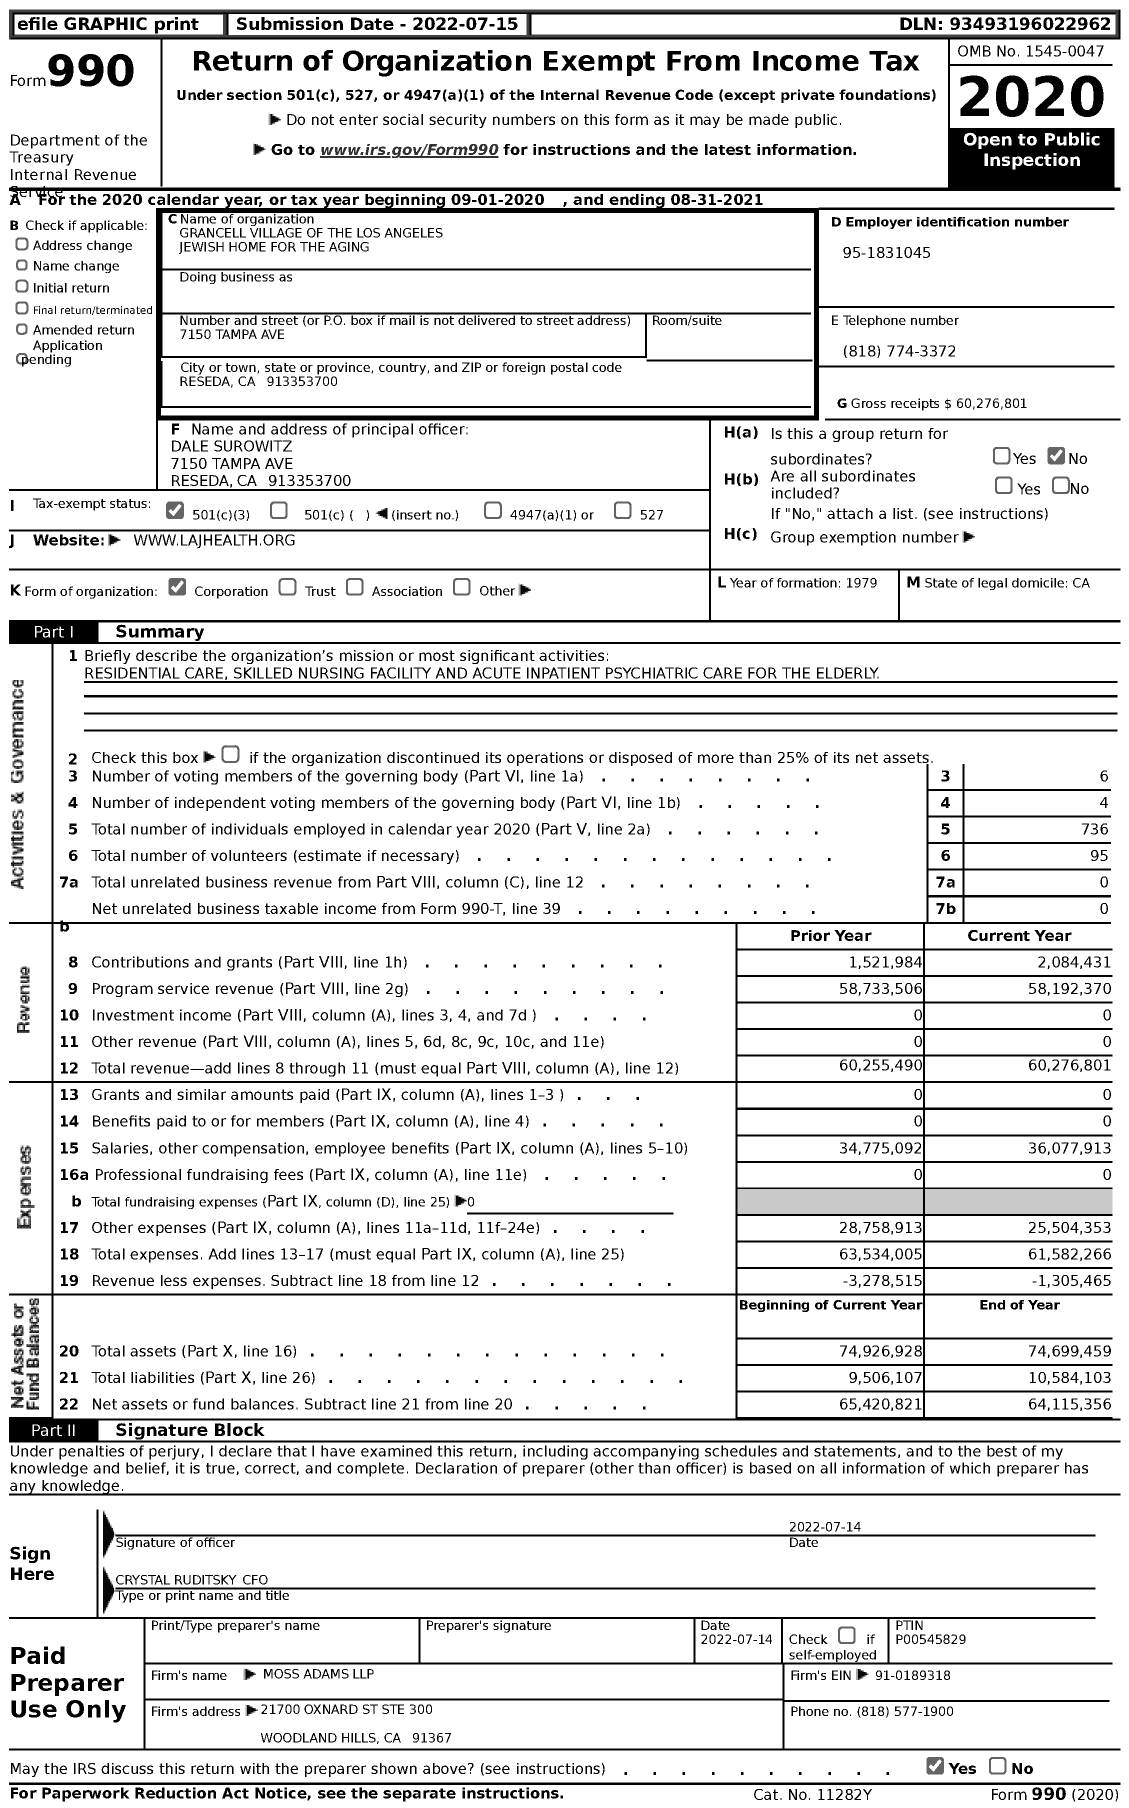 Image of first page of 2020 Form 990 for Grancell Village of the Los Angeles Jewish Home for the Aging